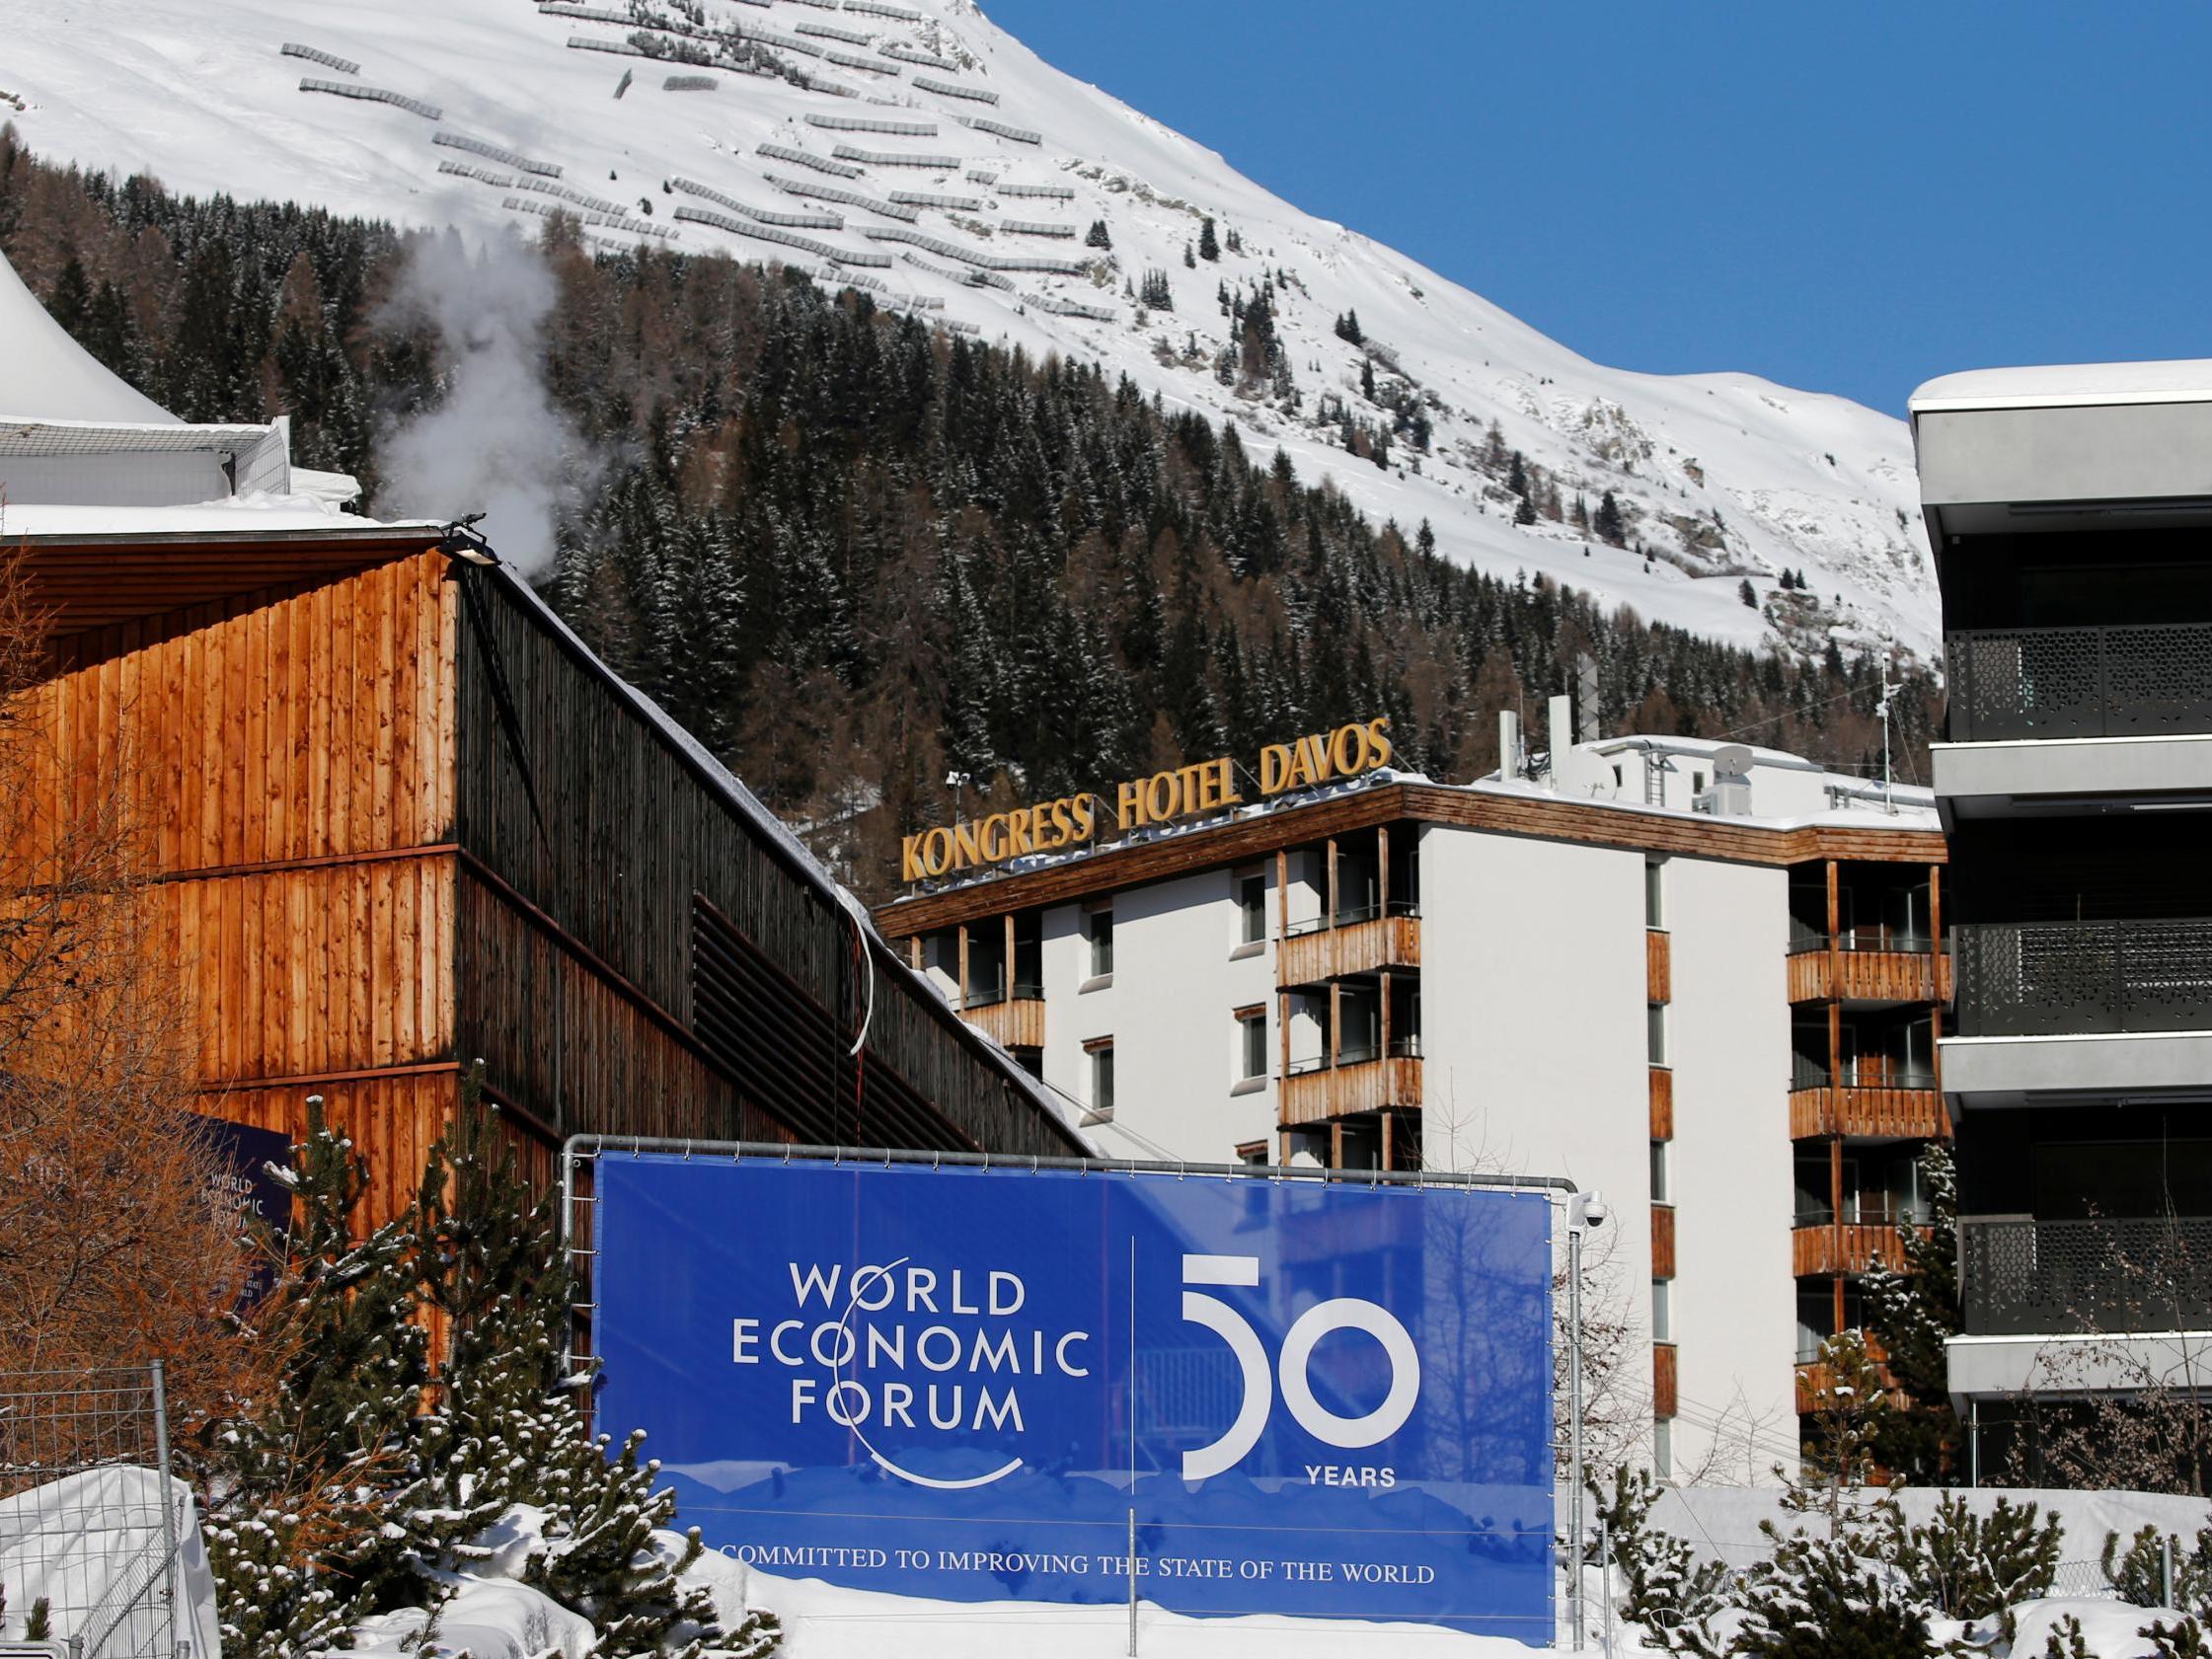 World leaders will gather in Davos for the World Economic Forum from Tuesday 21 January